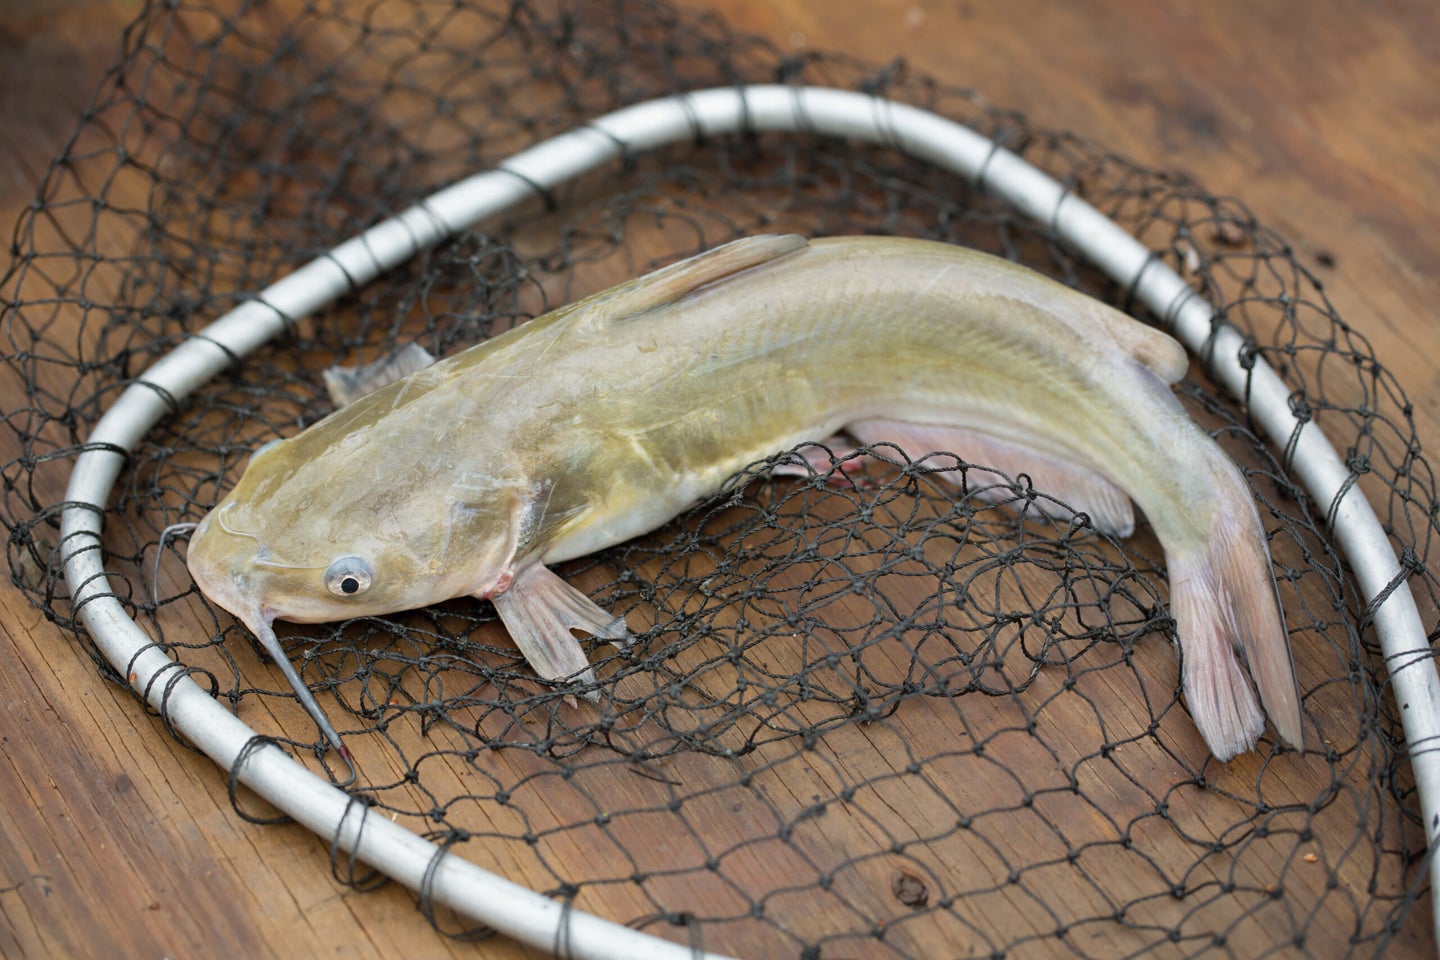 A channel catfish in a fishing net